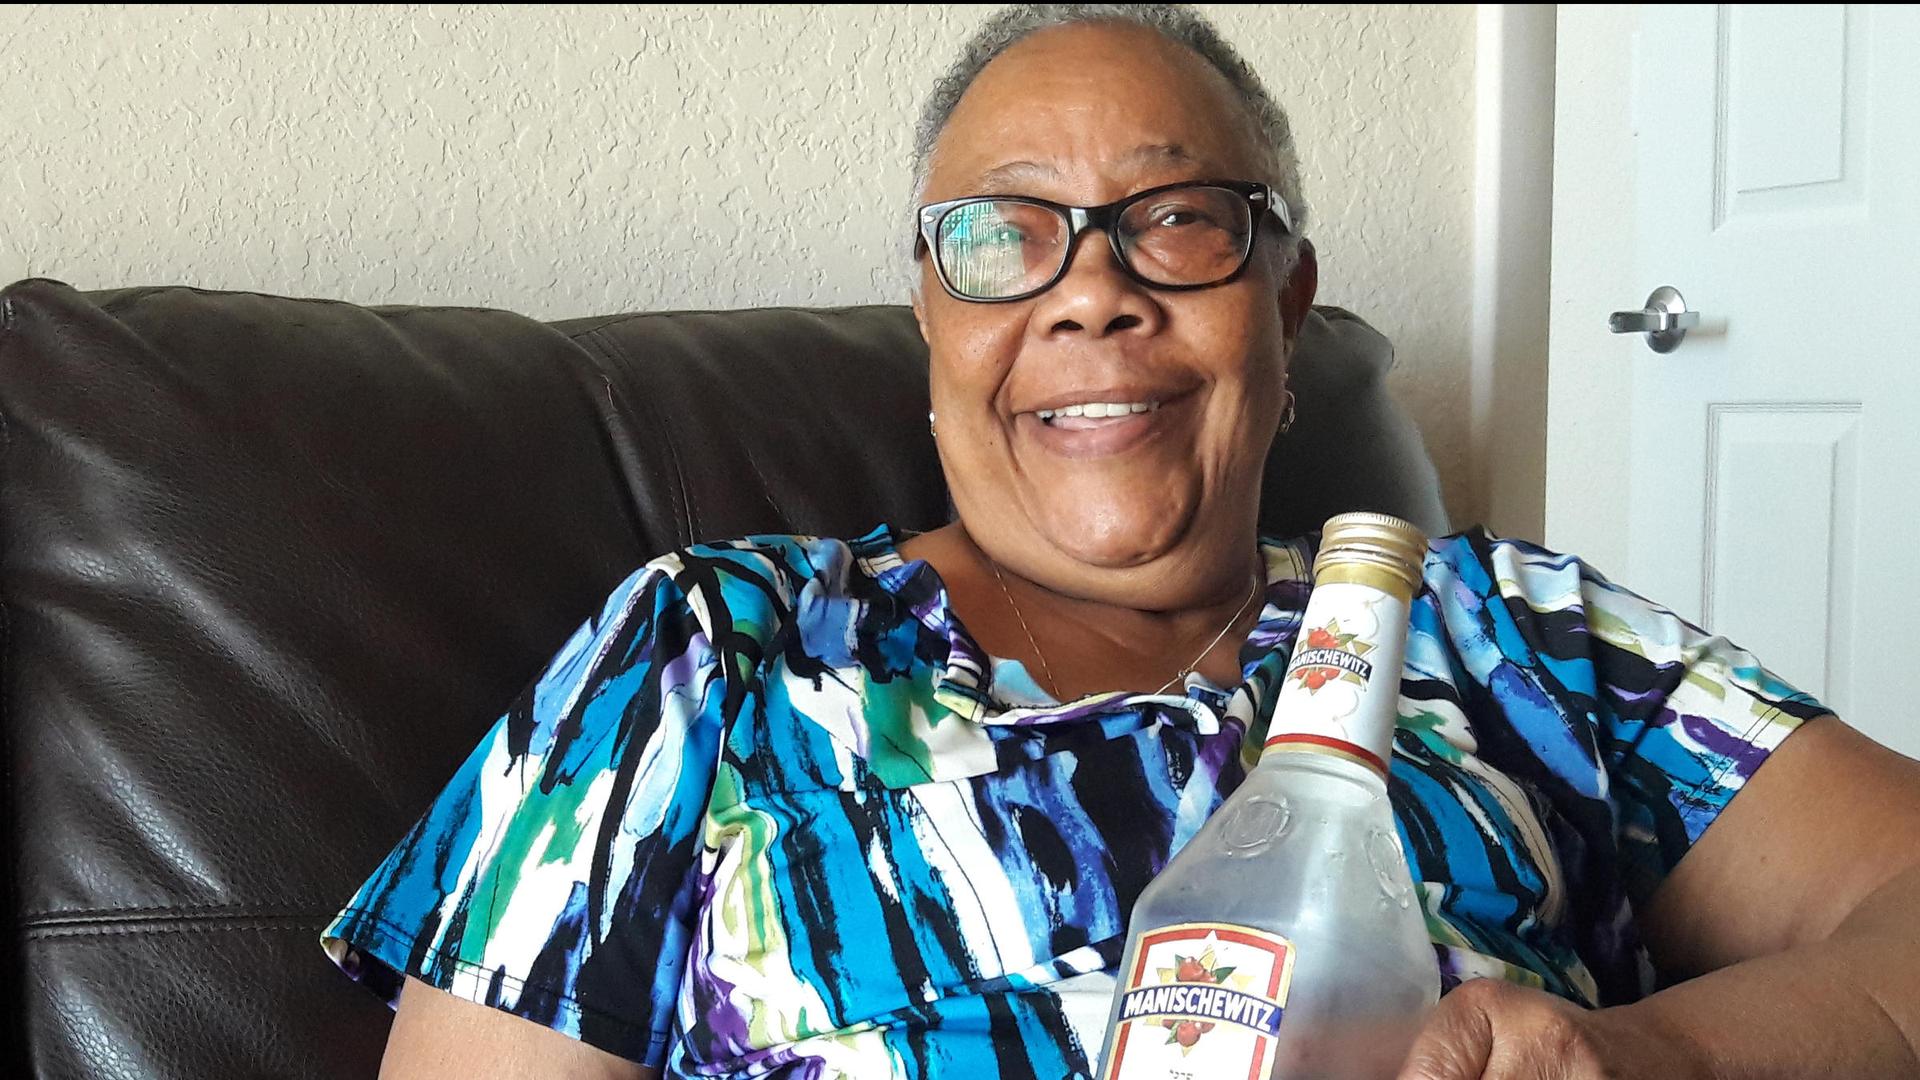 Hazel Bethel is a Manischewitz wine devotee. She's originally from Trinidad and was introduced to the wine by friends who worked in Jewish homes in New York.